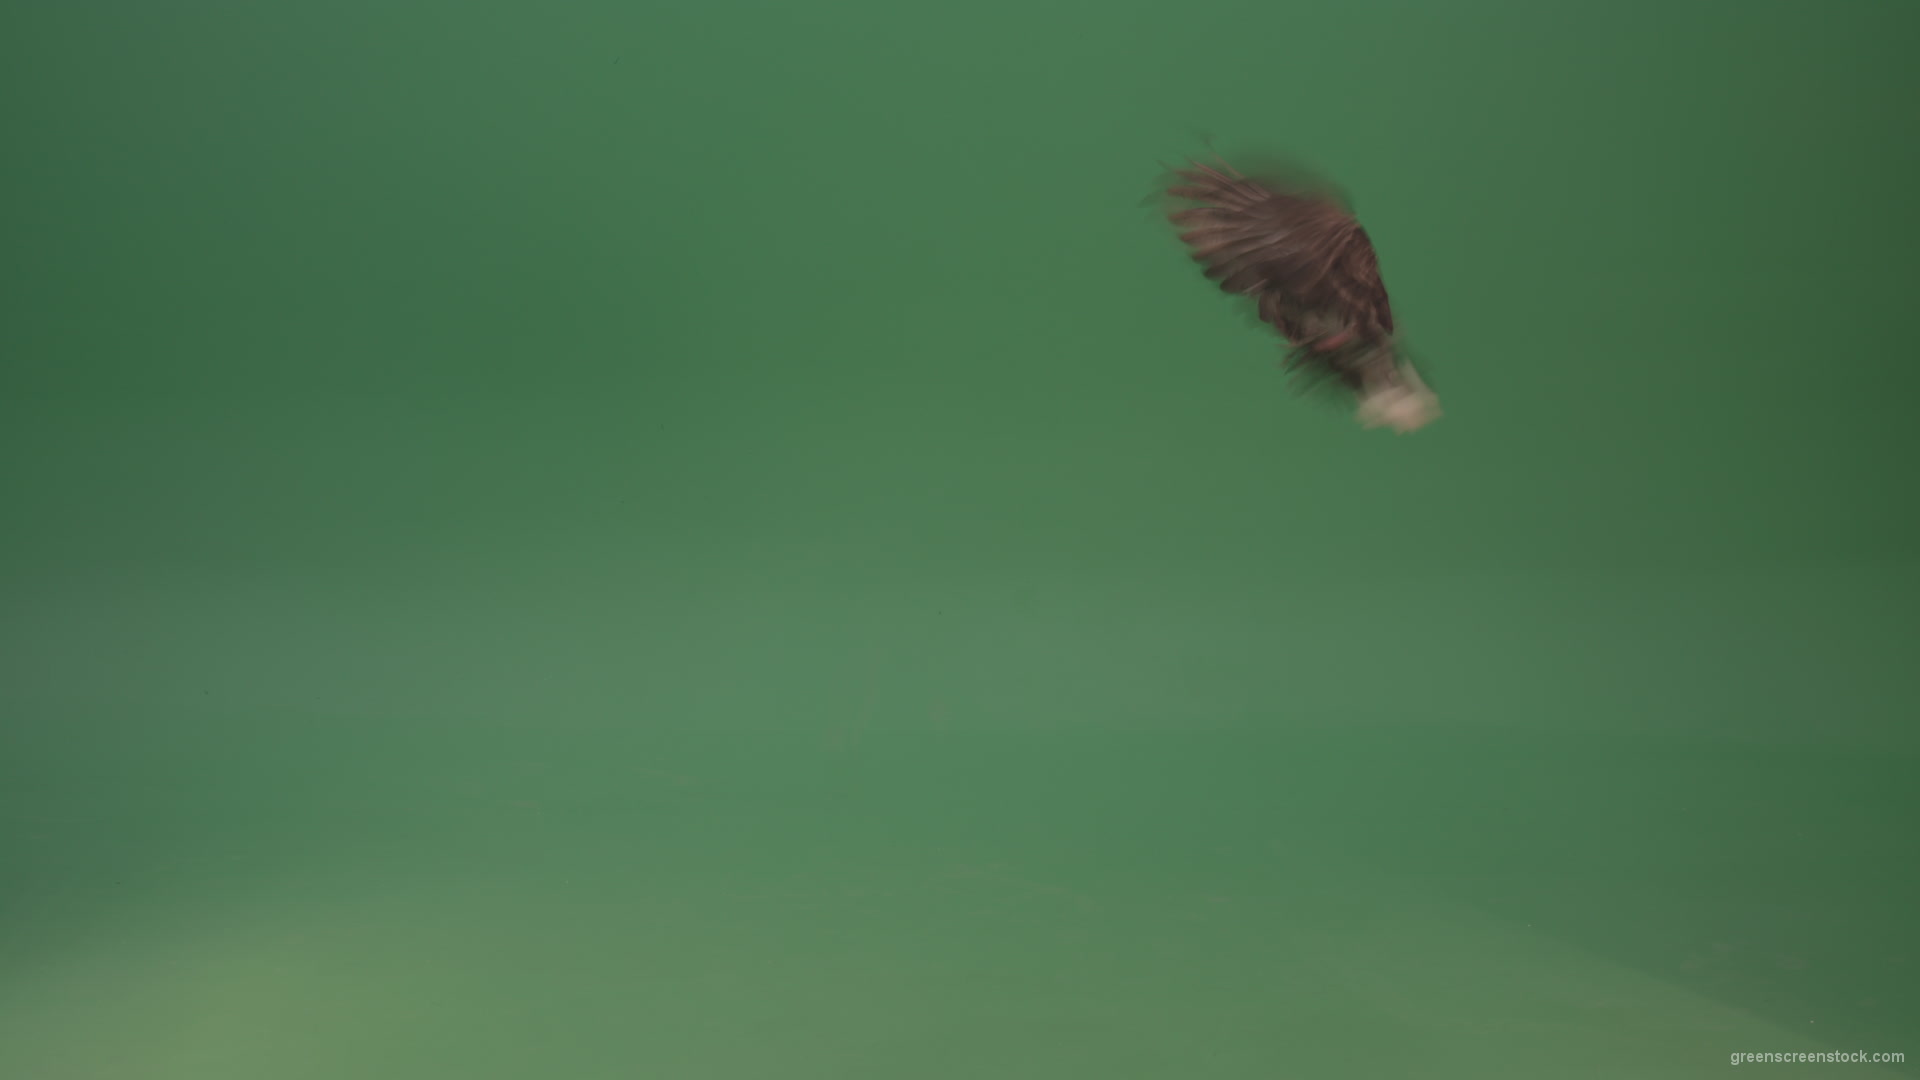 Dove-bird-flies-and-descends-to-the-ground-isolated-on-green-background_005 Green Screen Stock